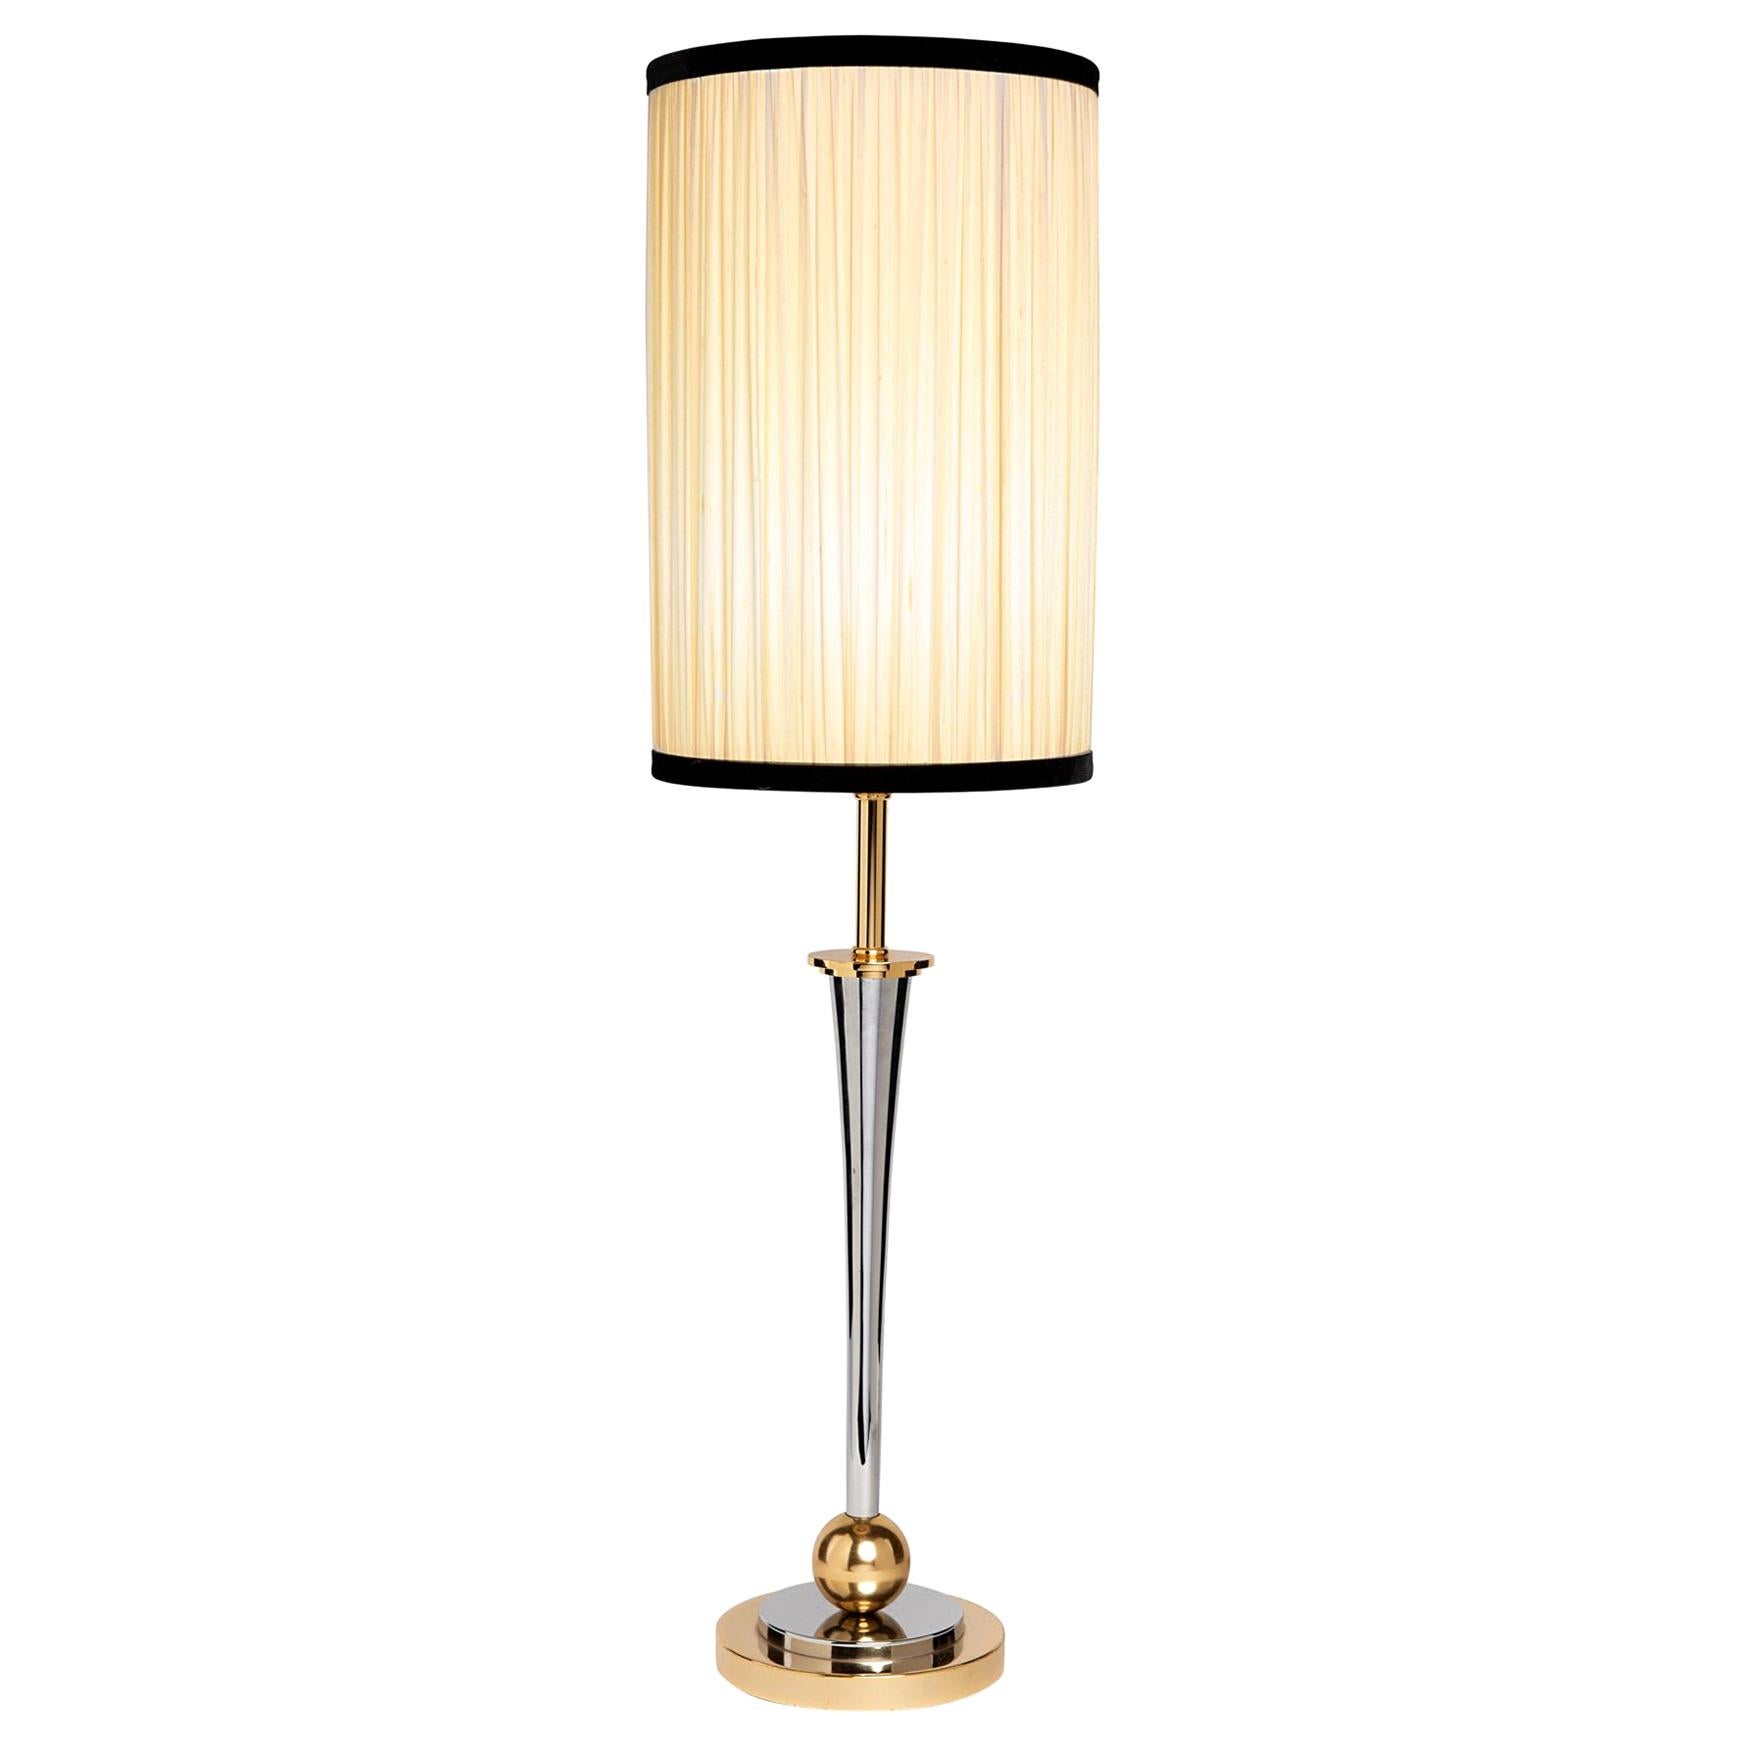 Mazda Style French Table Lamp Made of Nickel and Gilded Brass